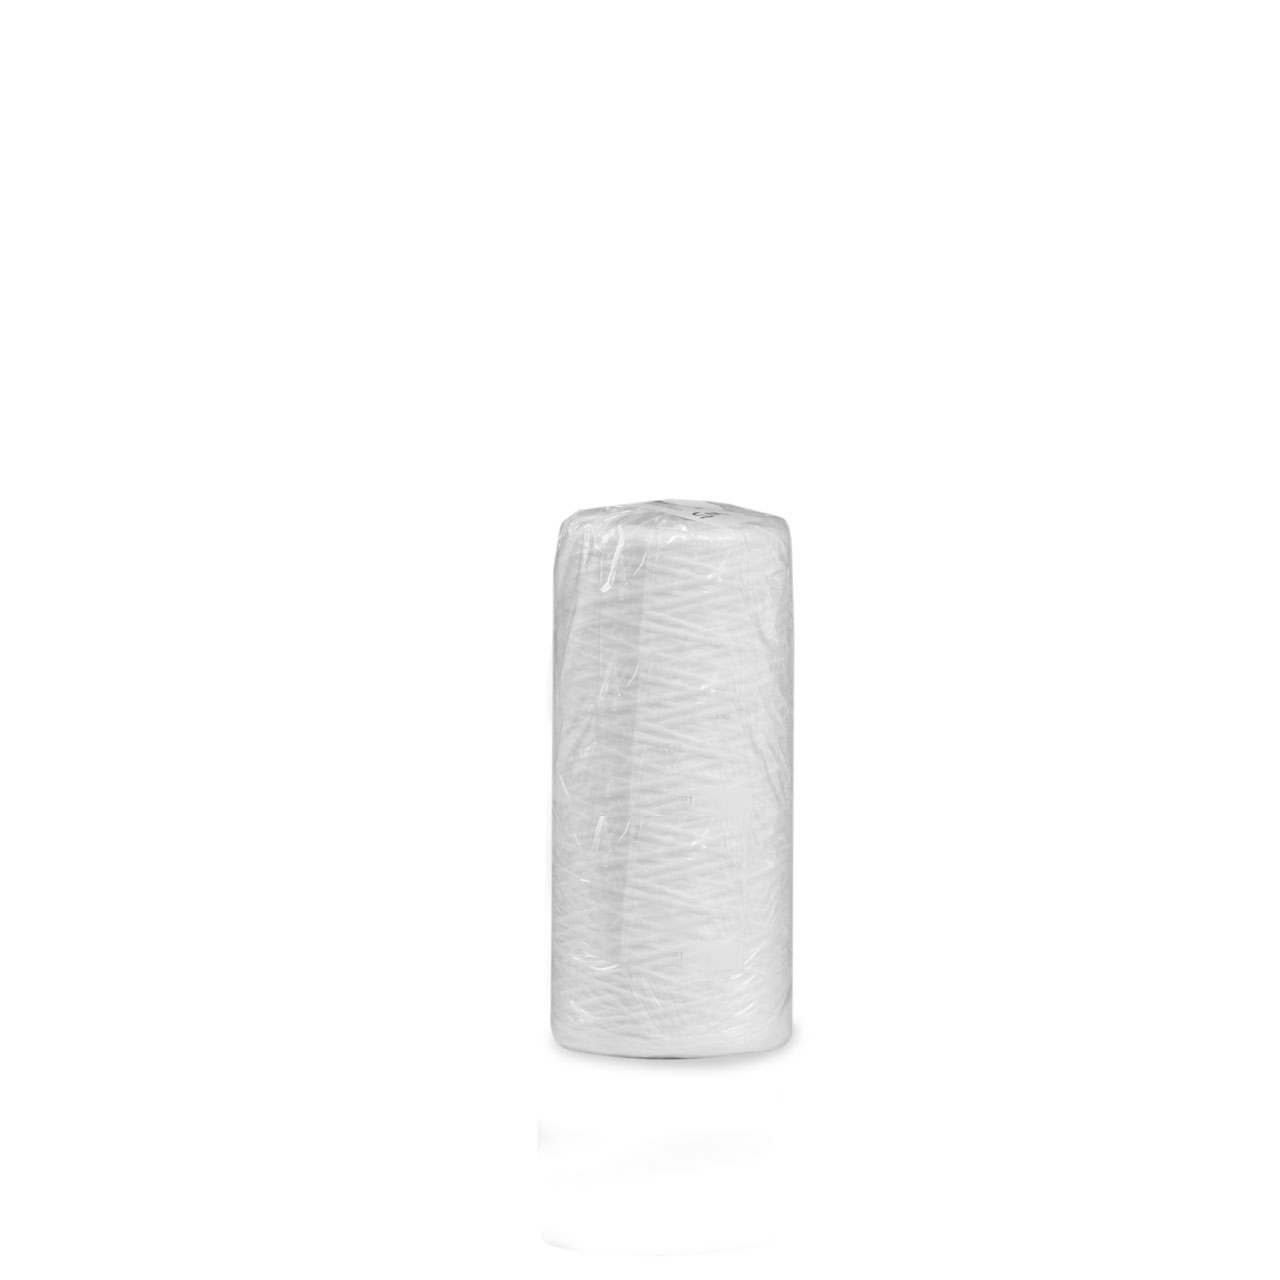 String Poly Wound Water Filter Cartridge 2-3/8" x 9.50"  5 Micron 6 